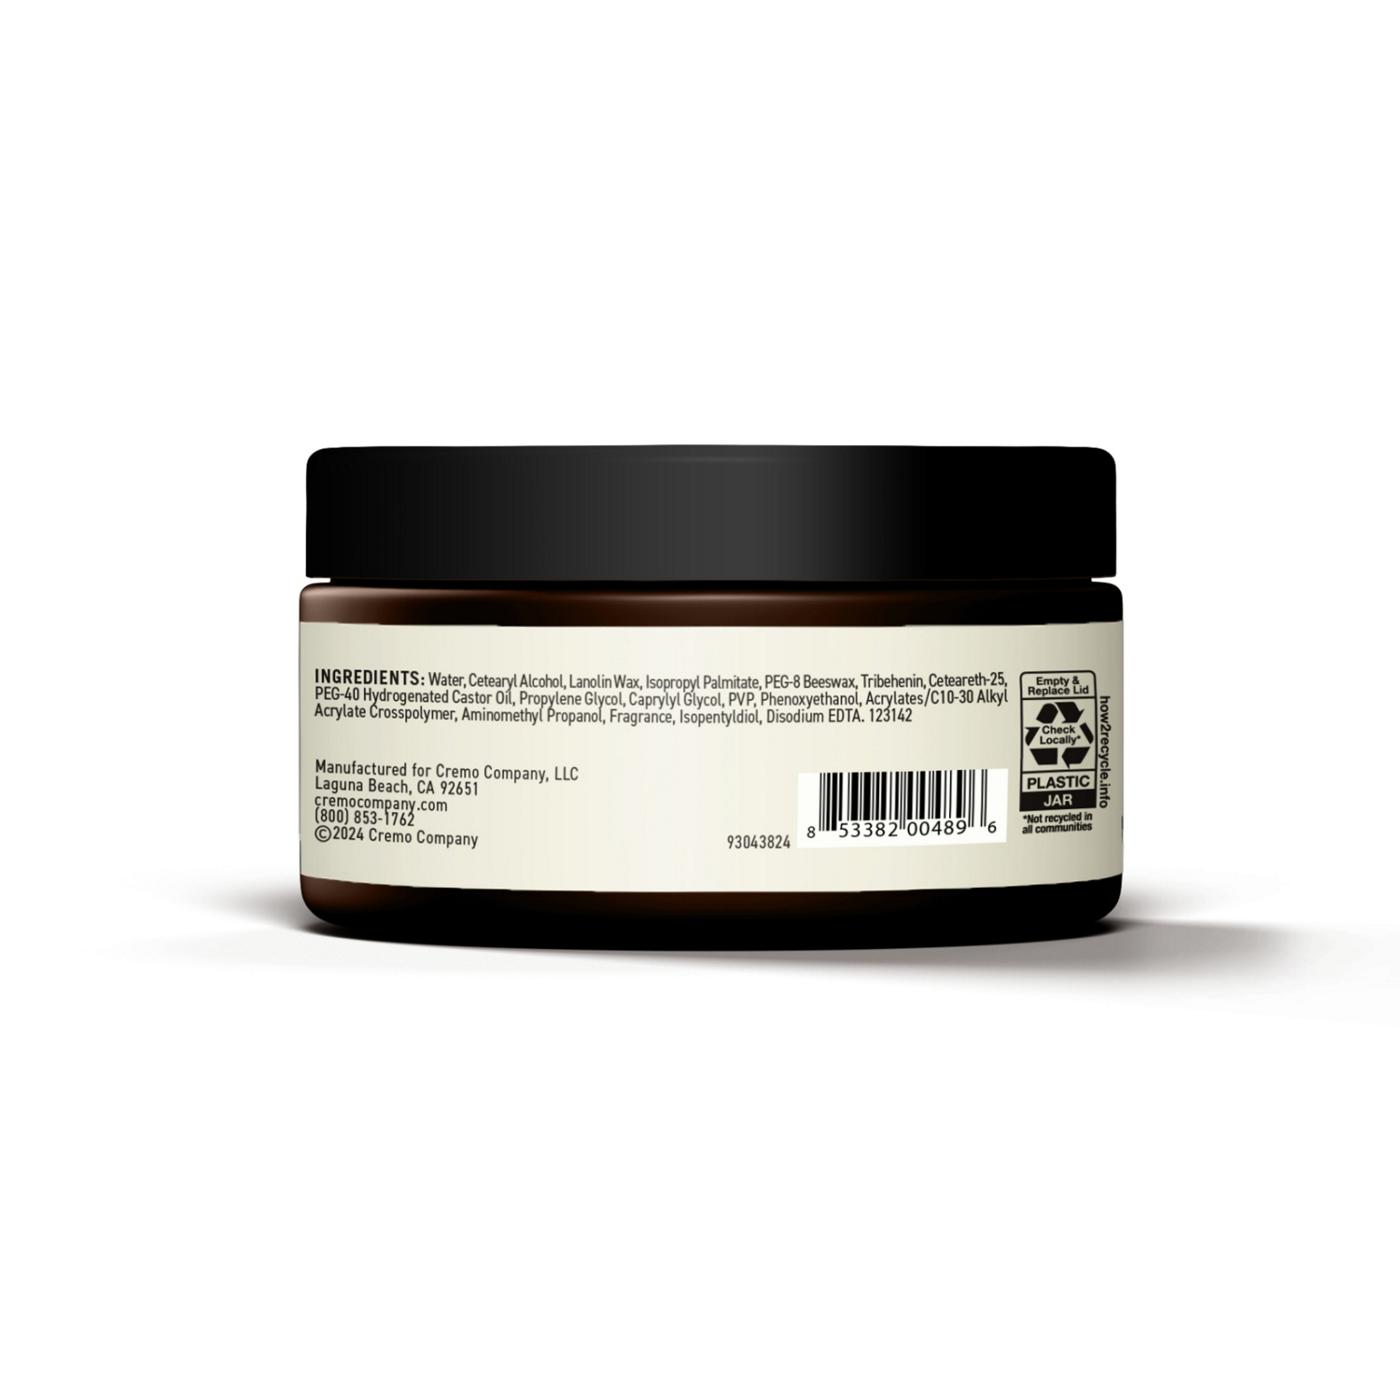 Cremo Hair Styling Pomade Thickening Paste; image 6 of 6